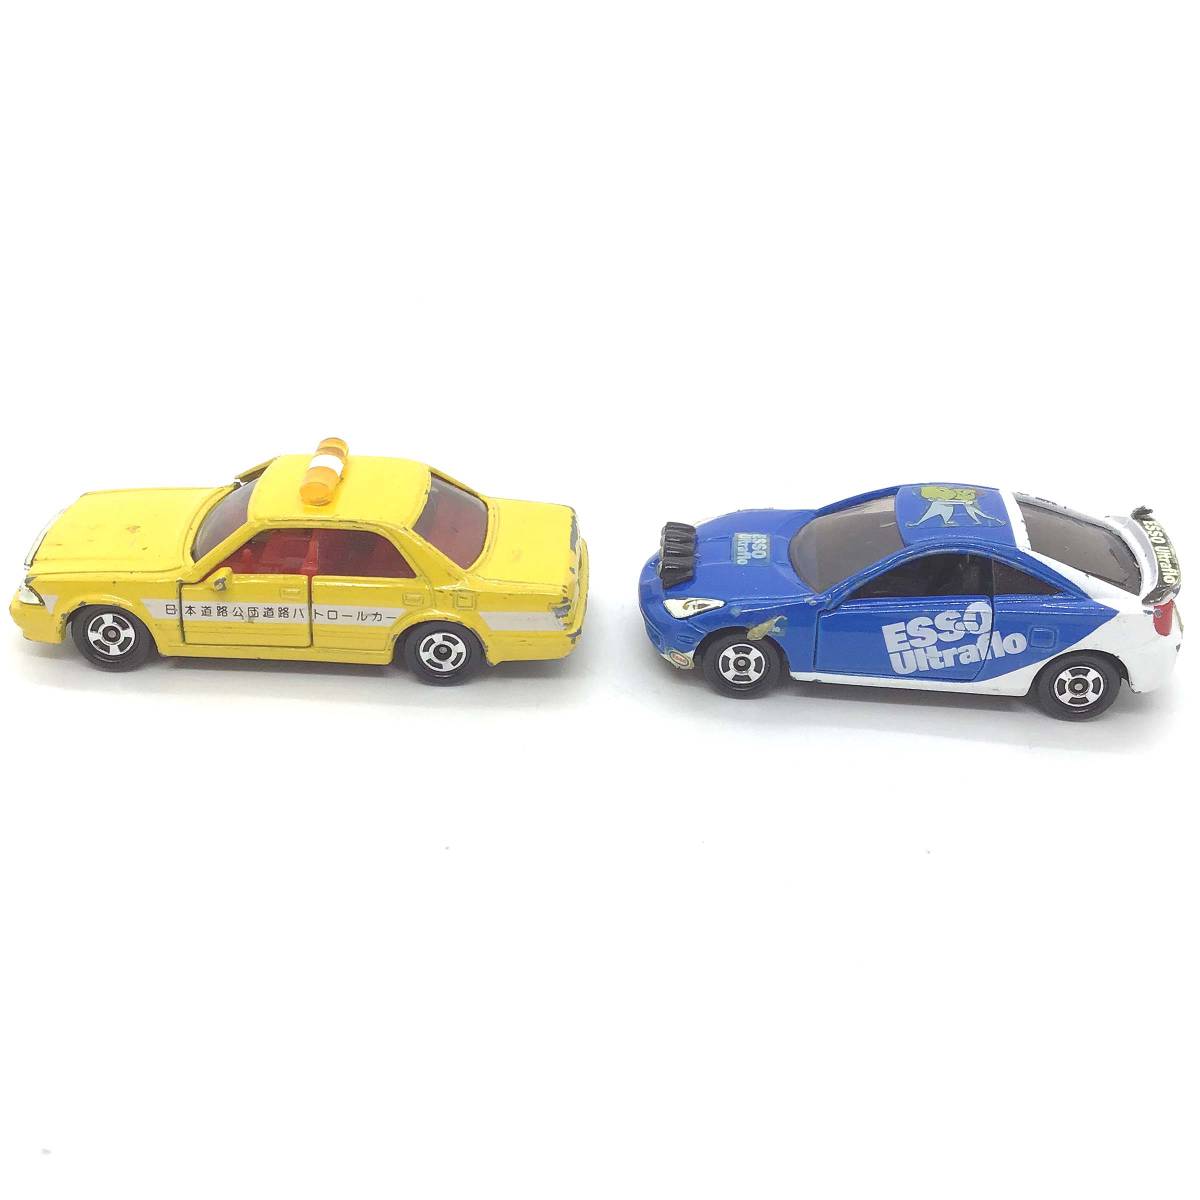 CL【tomica】TOYOTA CROWN No.55 CELICA No.96 2台セット トミカ コレクション ミニカー おもちゃ 玩具 トヨタ_画像5